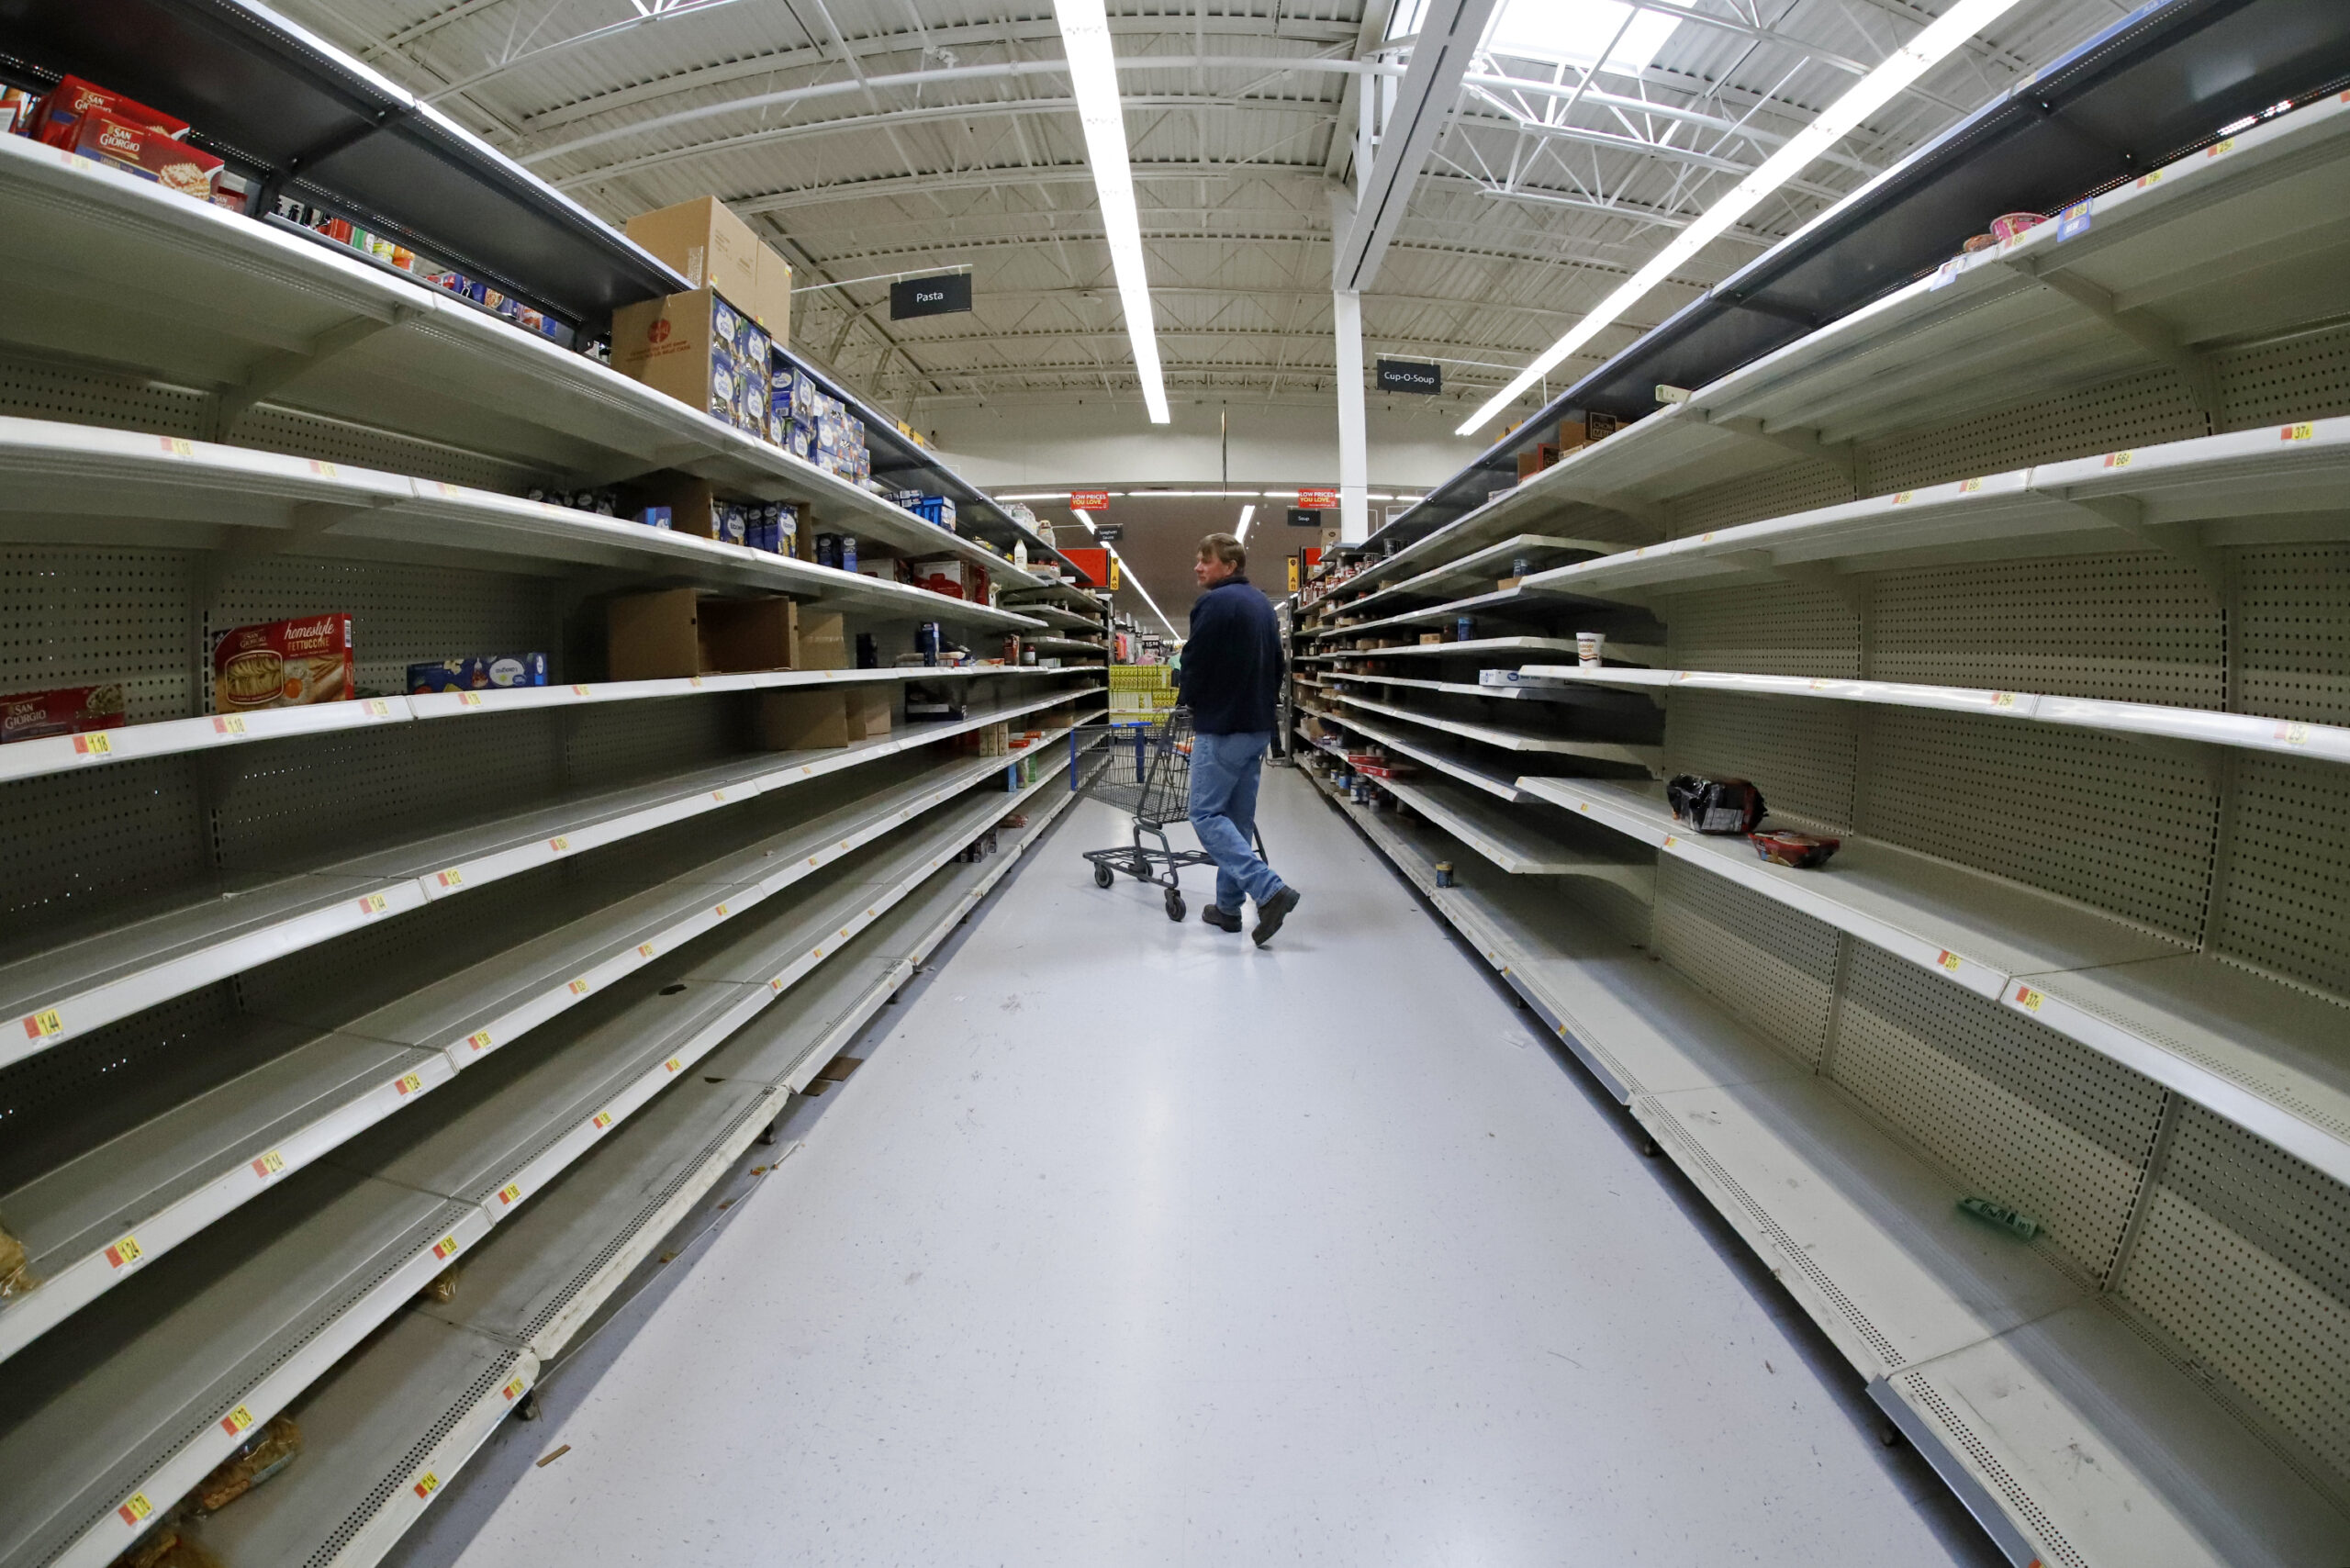 A man shops in an aisle of mostly empty shelves in a Walmart